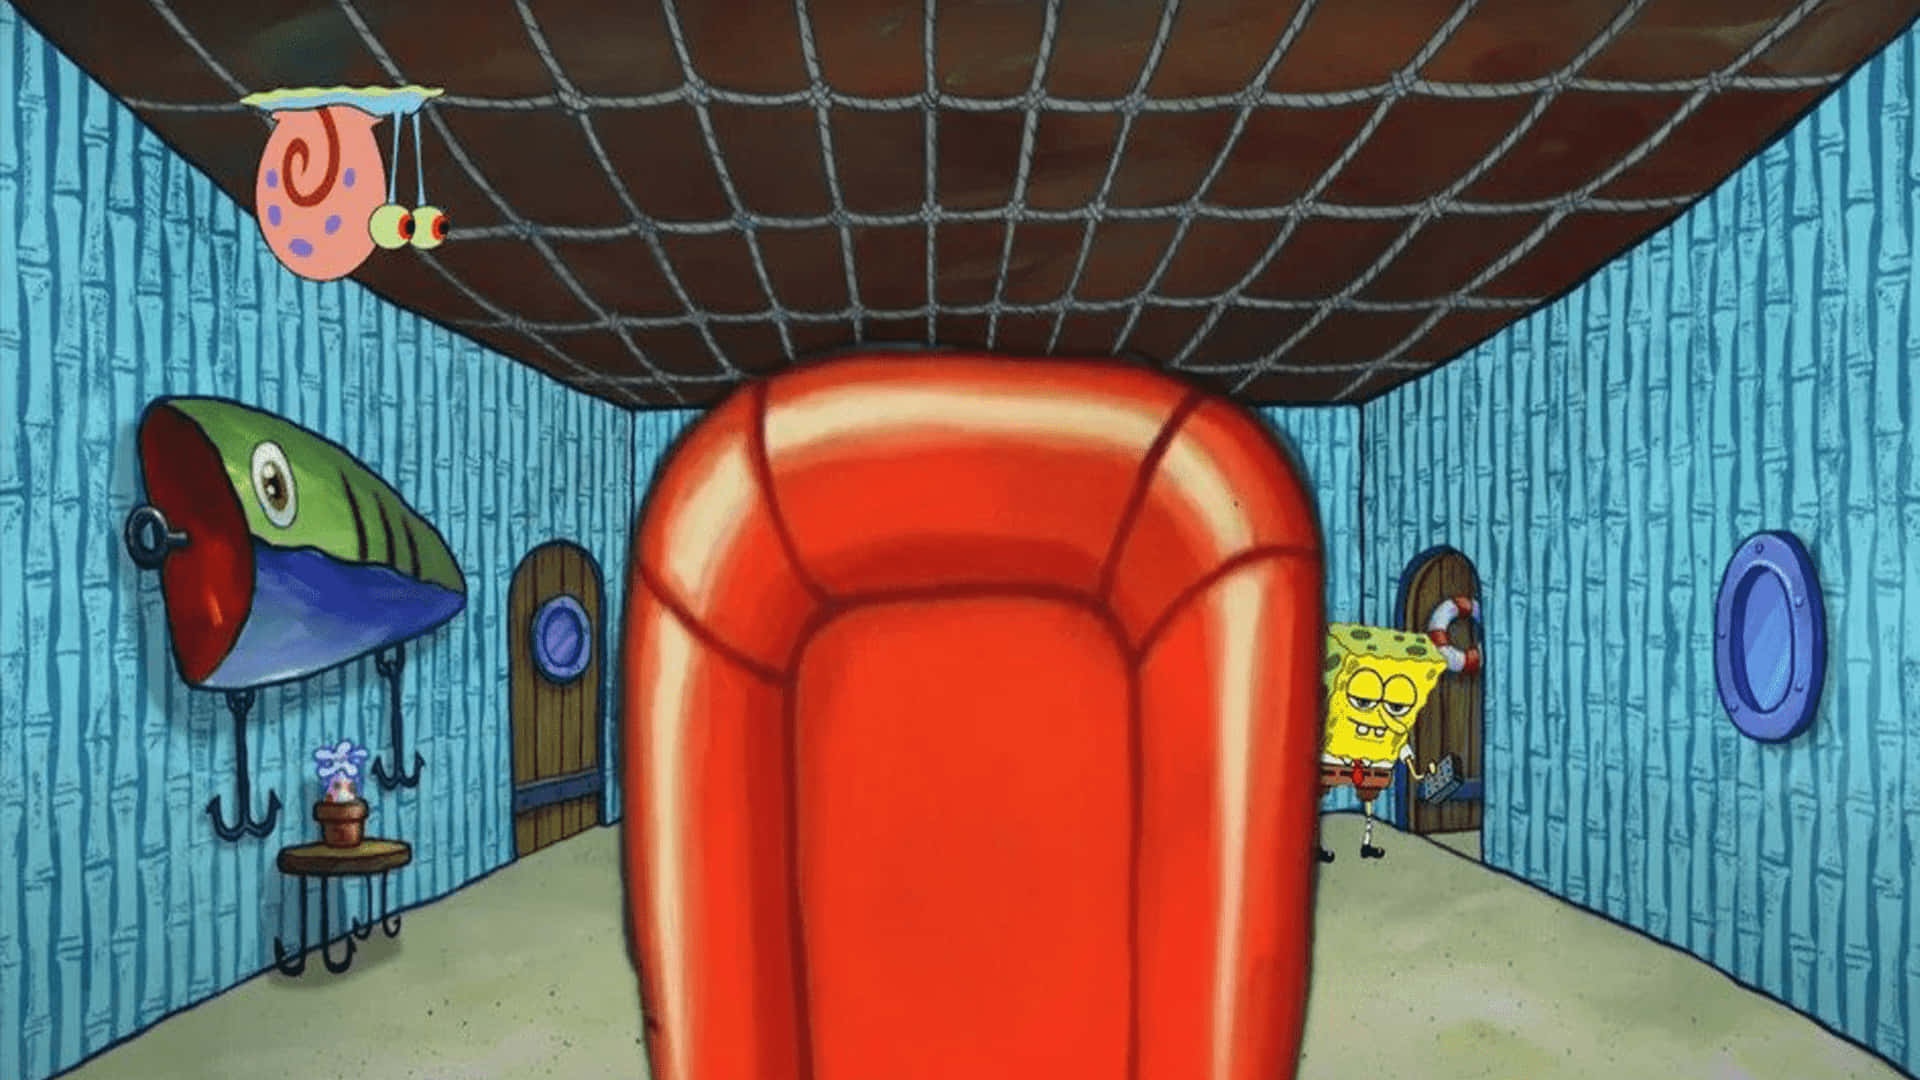 Spongebobsquarepants - Rum Med En Röd Stol. (this Sentence Can Be Used As A Description For A Computer Or Mobile Wallpaper Featuring Spongebob Squarepants In A Room With A Red Chair.)